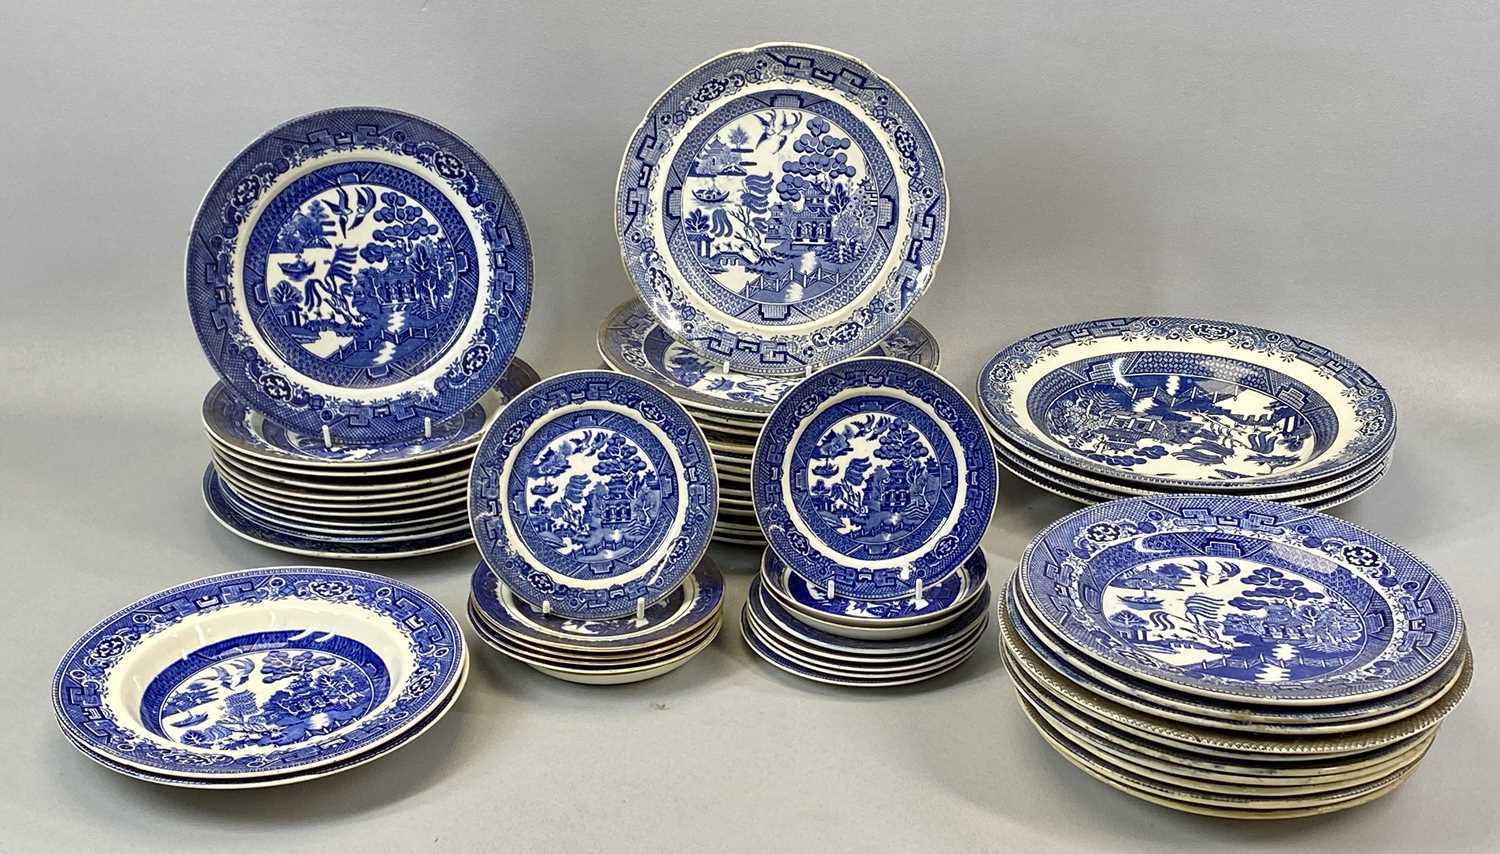 LARGE GROUP OF 19TH CENTURY STAFFORDSHIRE BLUE & WHITE WILLOW PATTERN TABLEWARE, including seven - Image 3 of 3